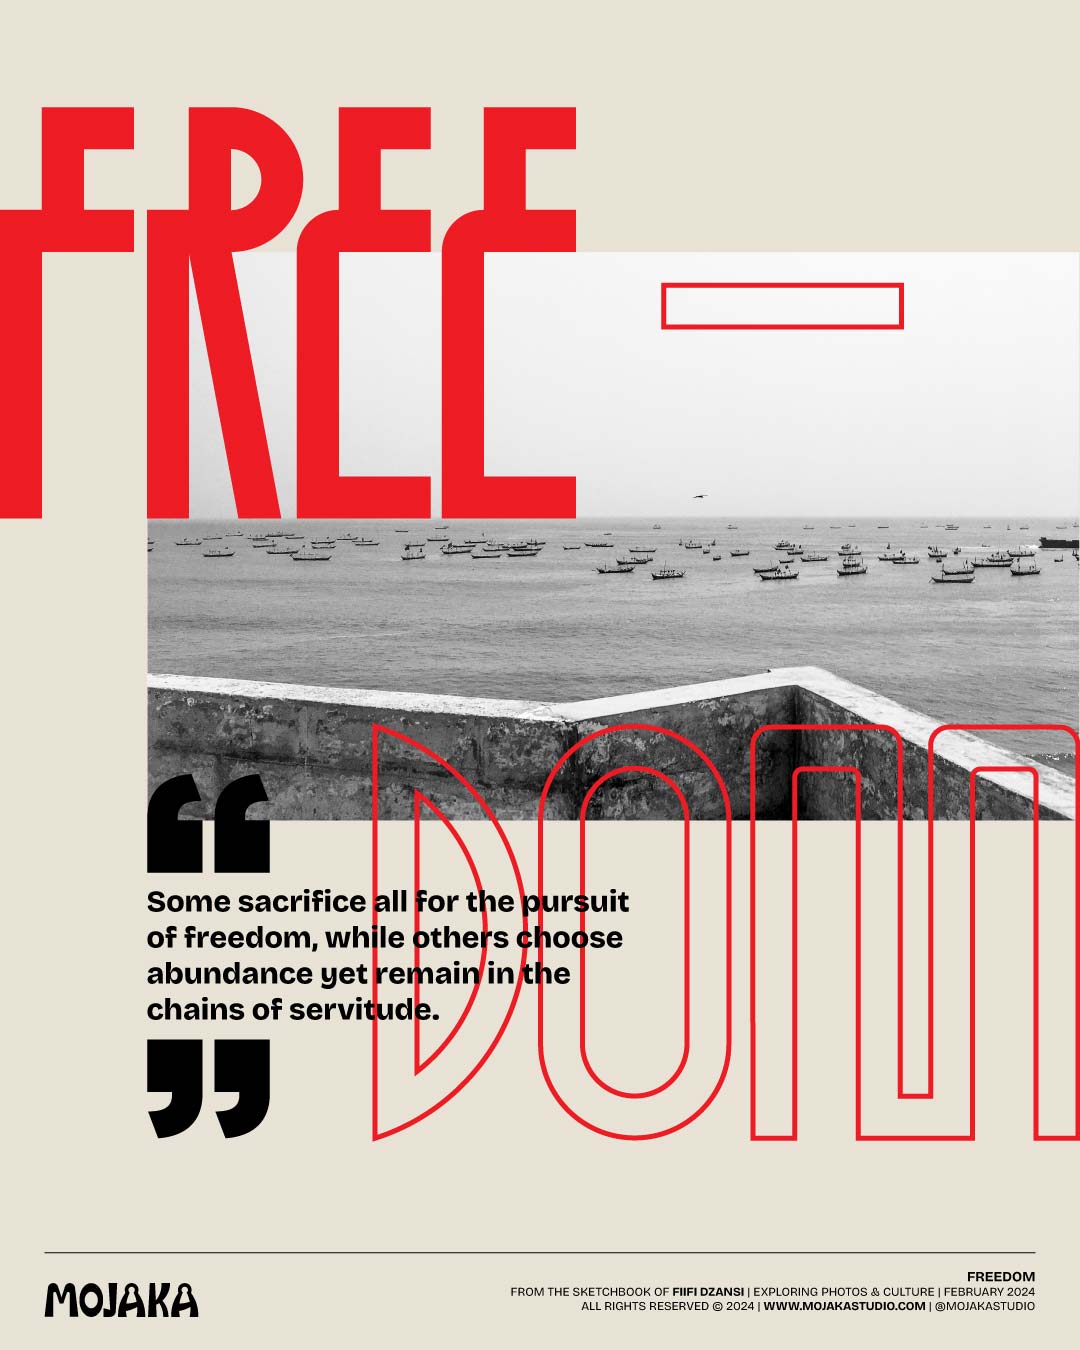 Freedom type design on a photo of the sea with canoes at Jamestown in Accra